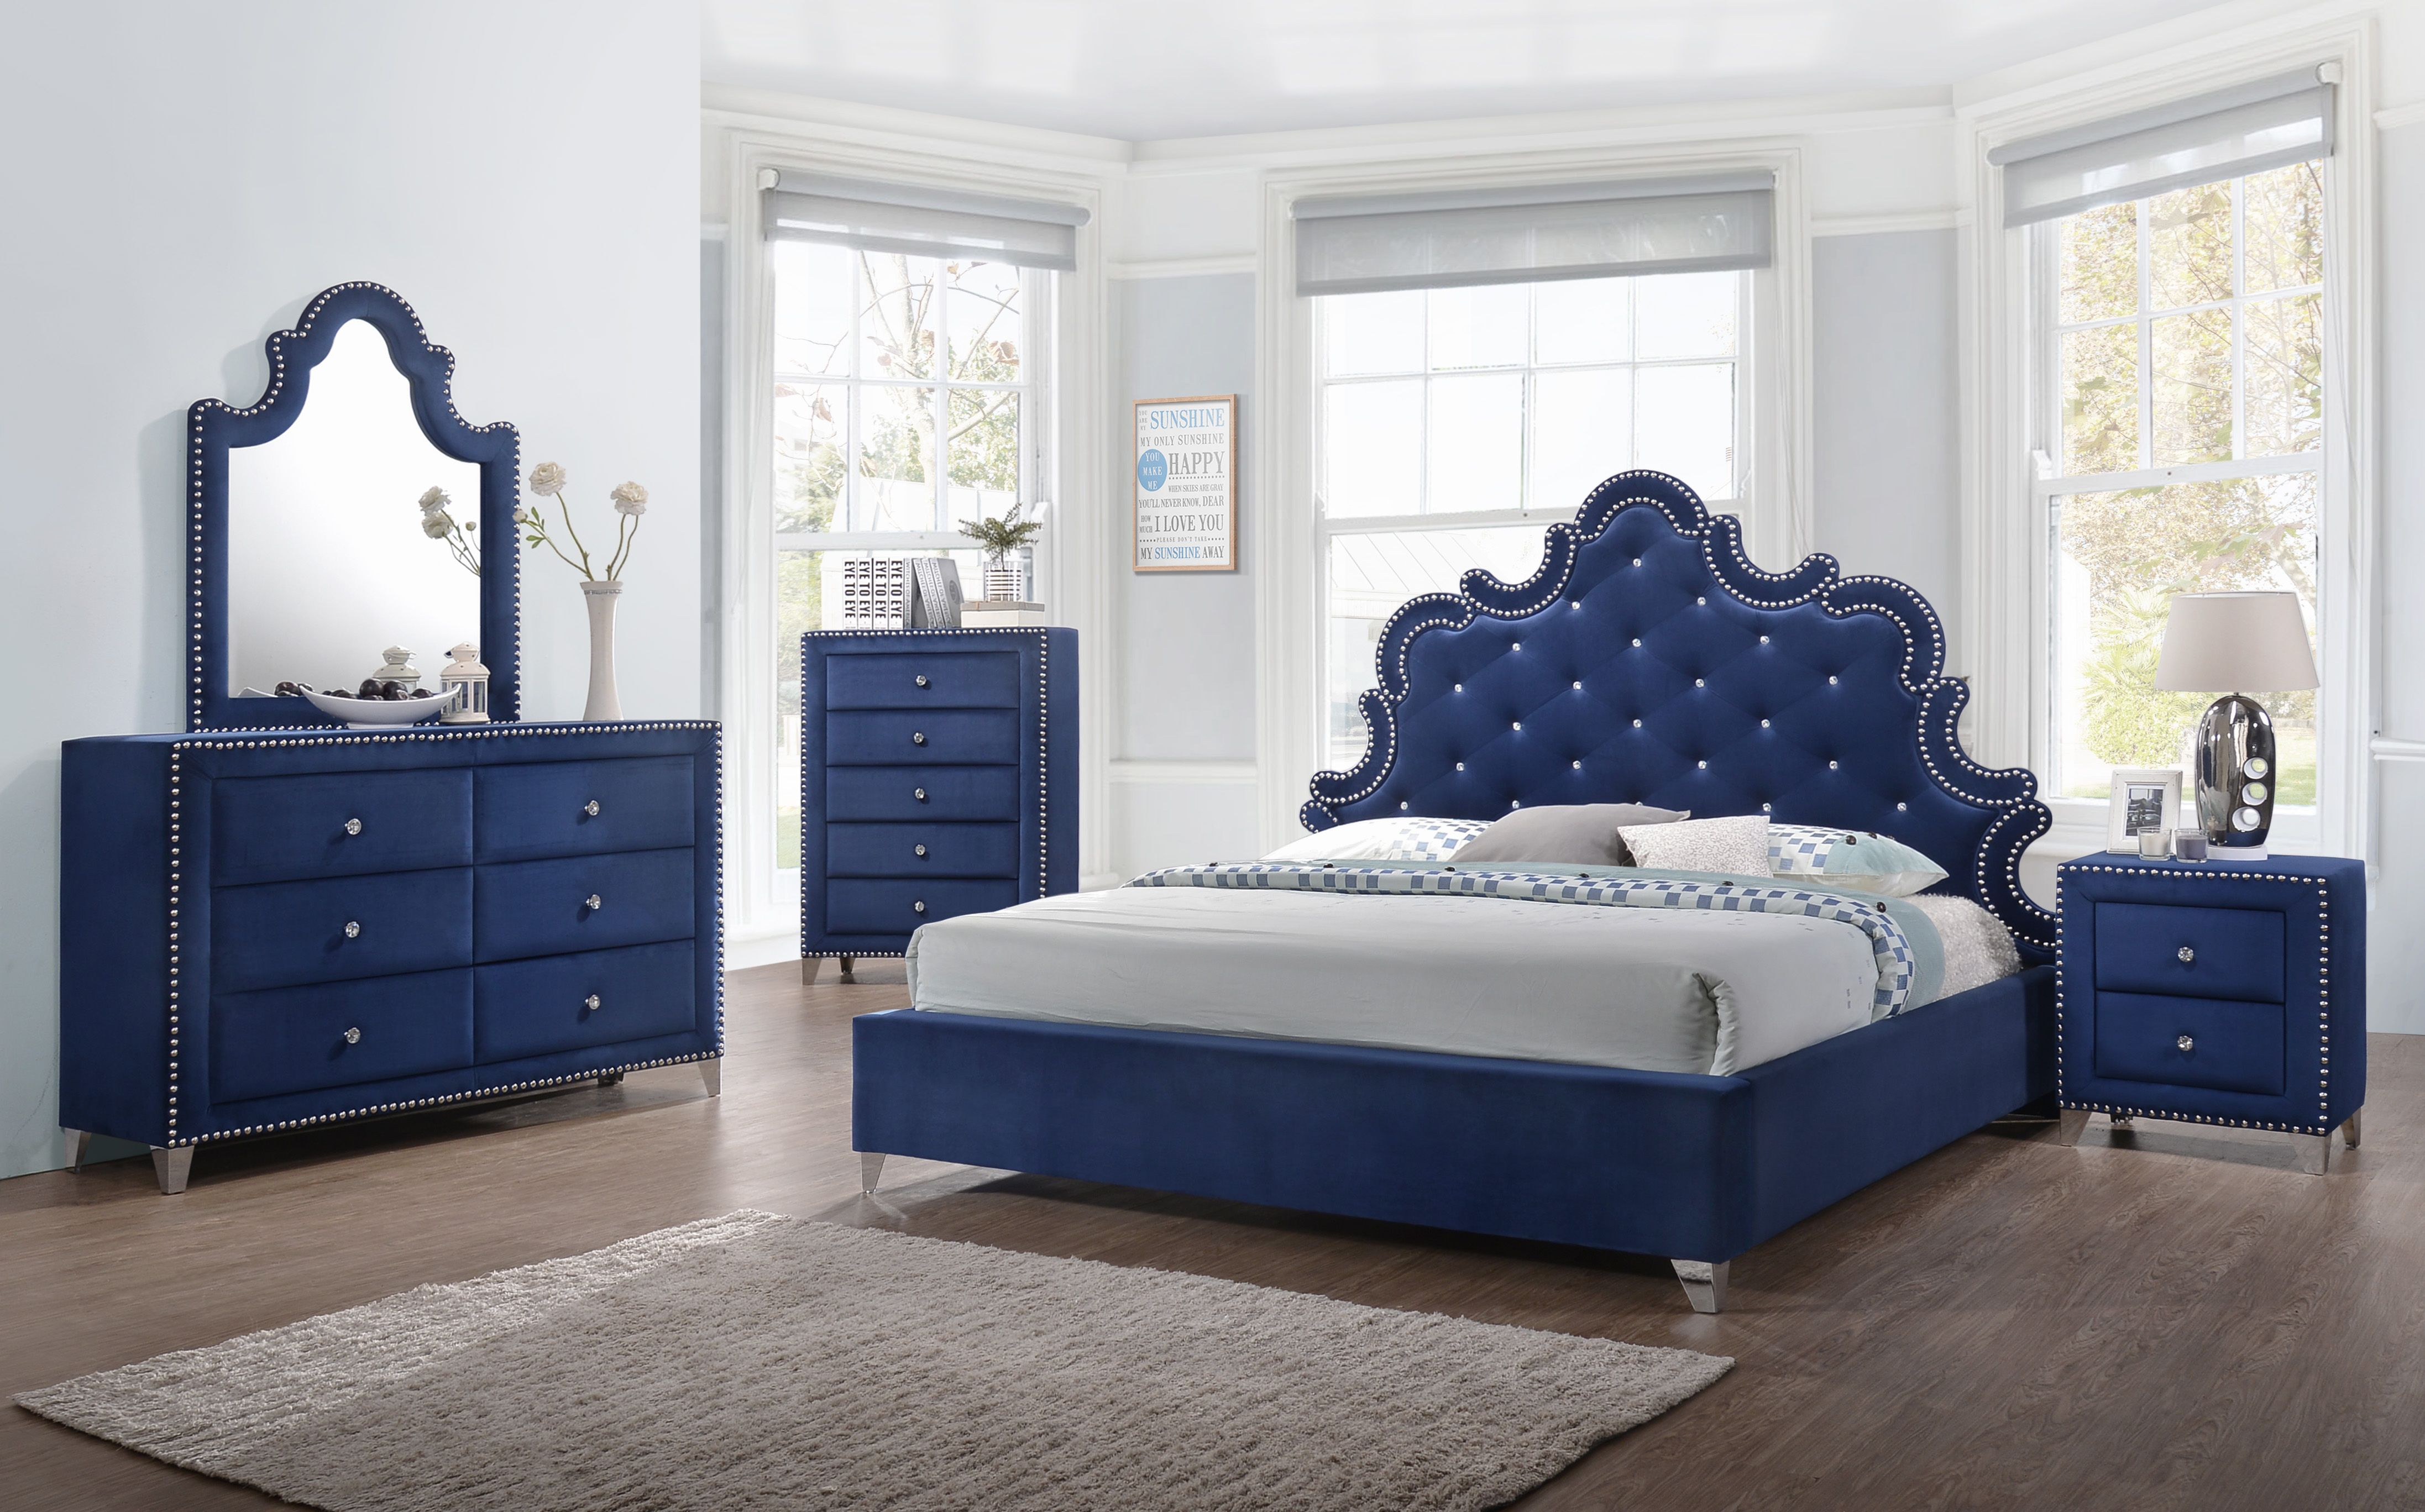 The Caroline Bedroom Set Meridian Furniture Features A Custom in size 4387 X 2736